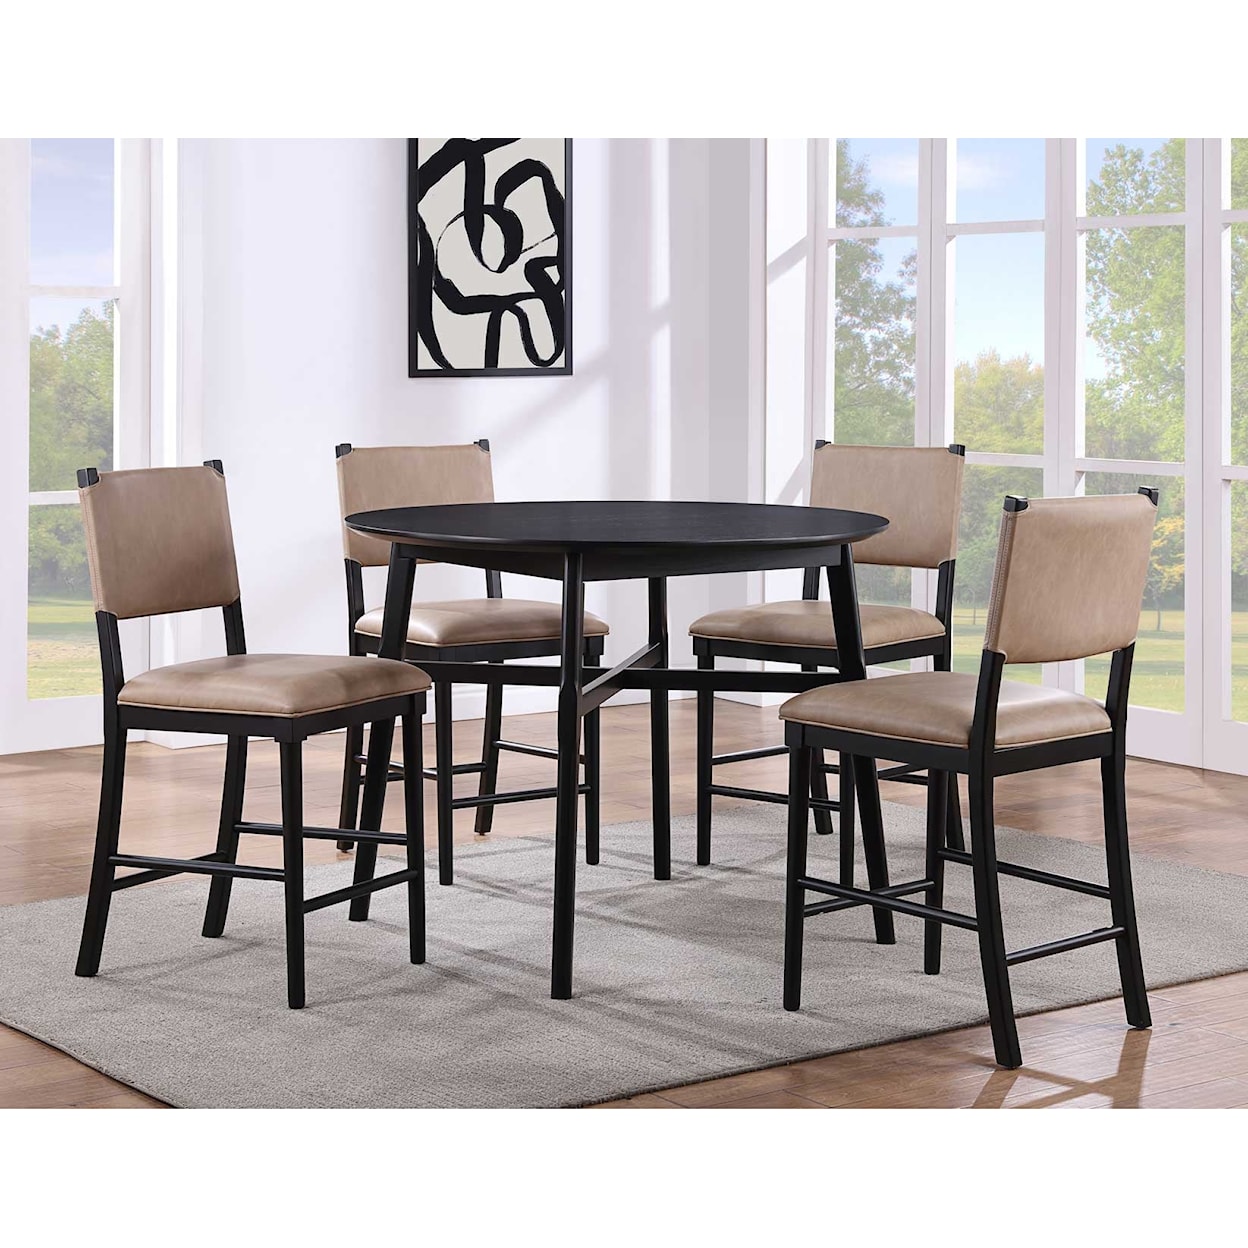 Prime Oslo 5-Piece Counter Height Dining Set